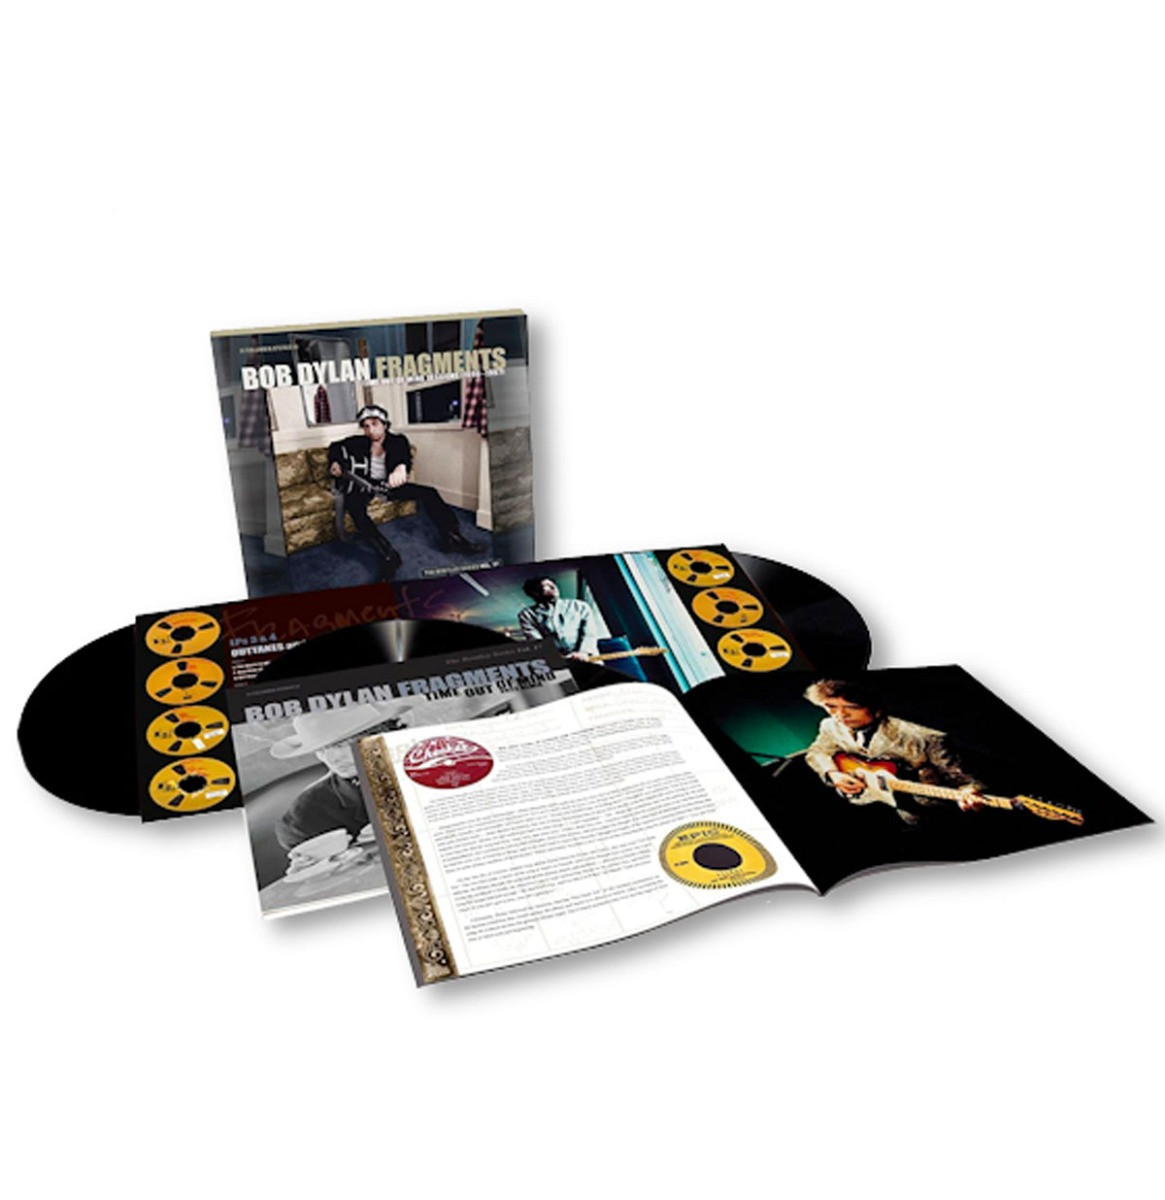 Bob Dylan - Fragments: Time Out Of Mind Sessions (1996-1997) The Bootleg Series Vol.17 4LP + Booklet Boxset